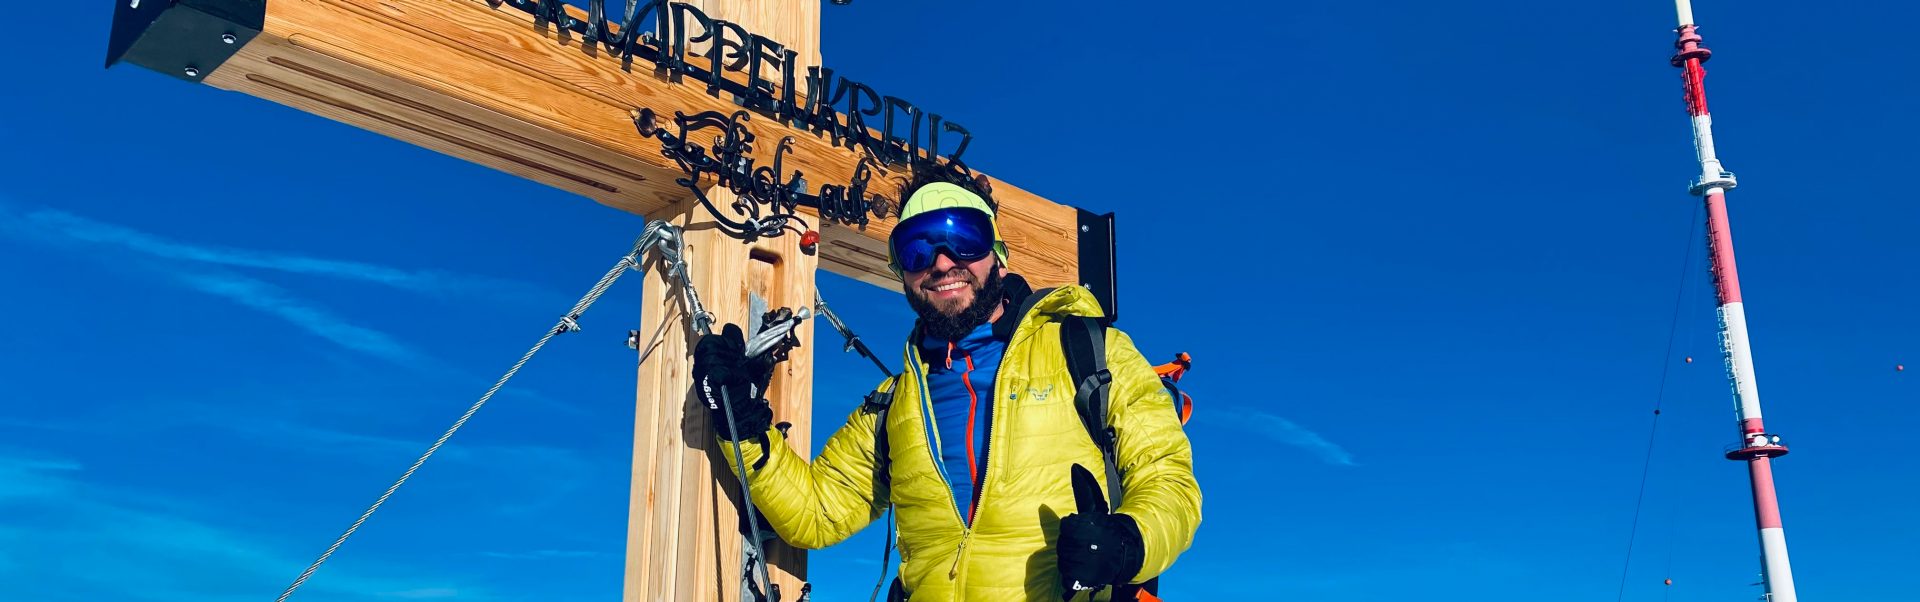 This picture shows Manfred who works at BMW while skitouring.